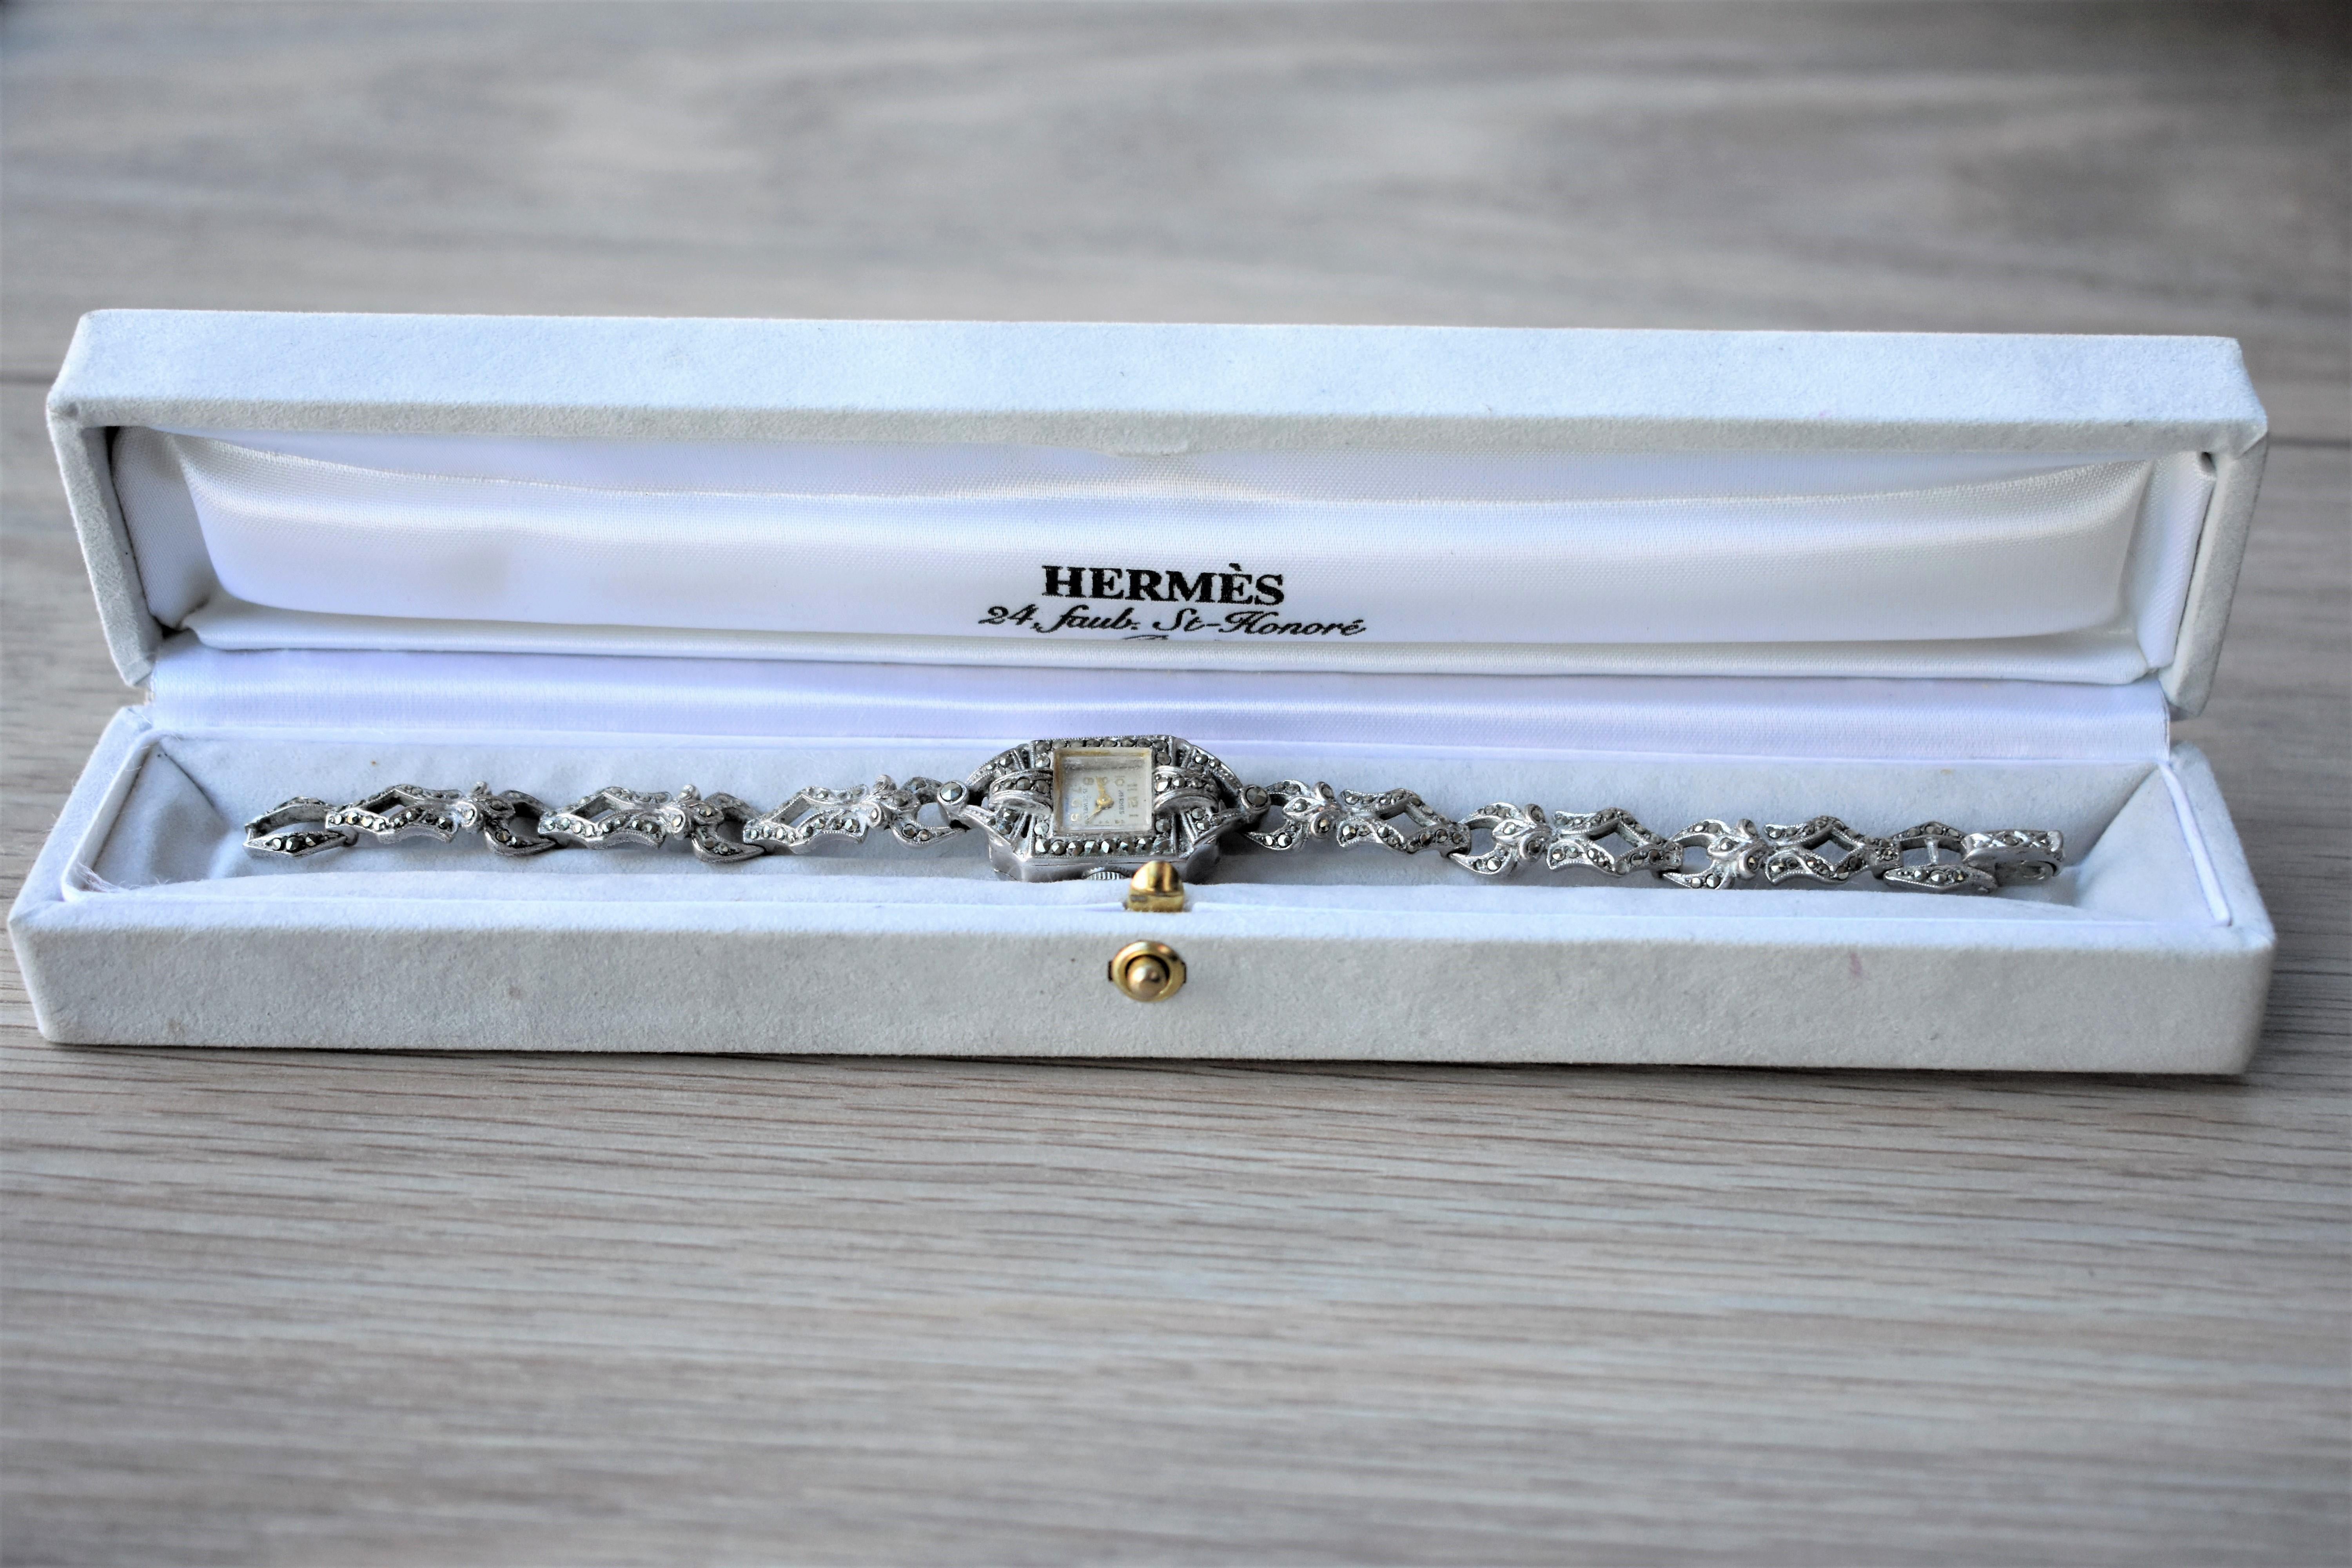 This lovely art deco style cocktail watch by Hermes is made from metal rhodié and decorated with marcasite. It shimmers very classy when light hits the stones. It has a 15 jewel mechanism, currently not working (this is taken into account in the